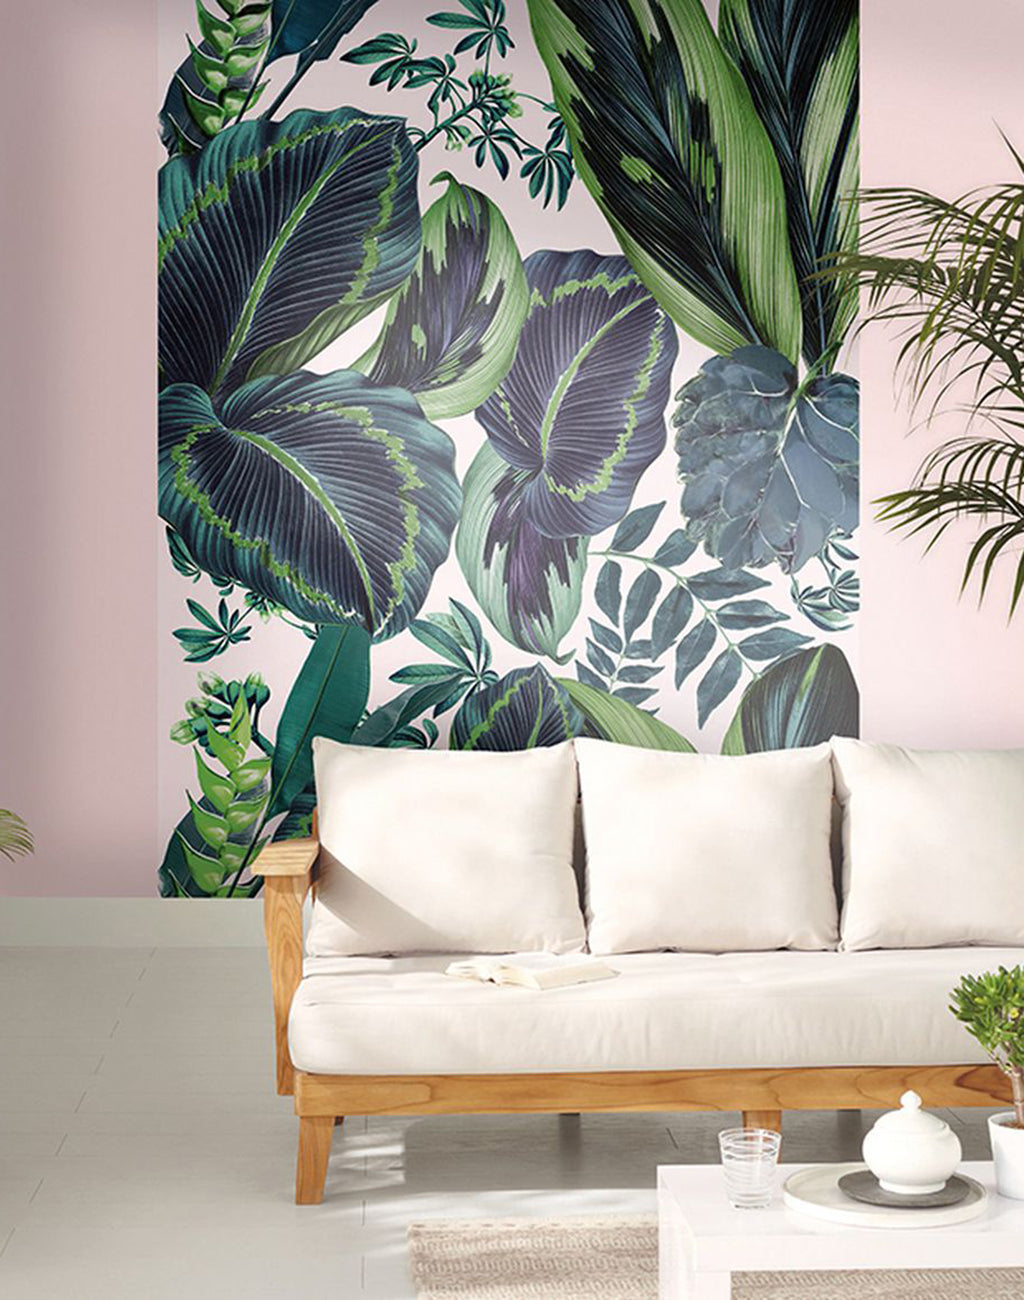 The Pink Jungle Mural